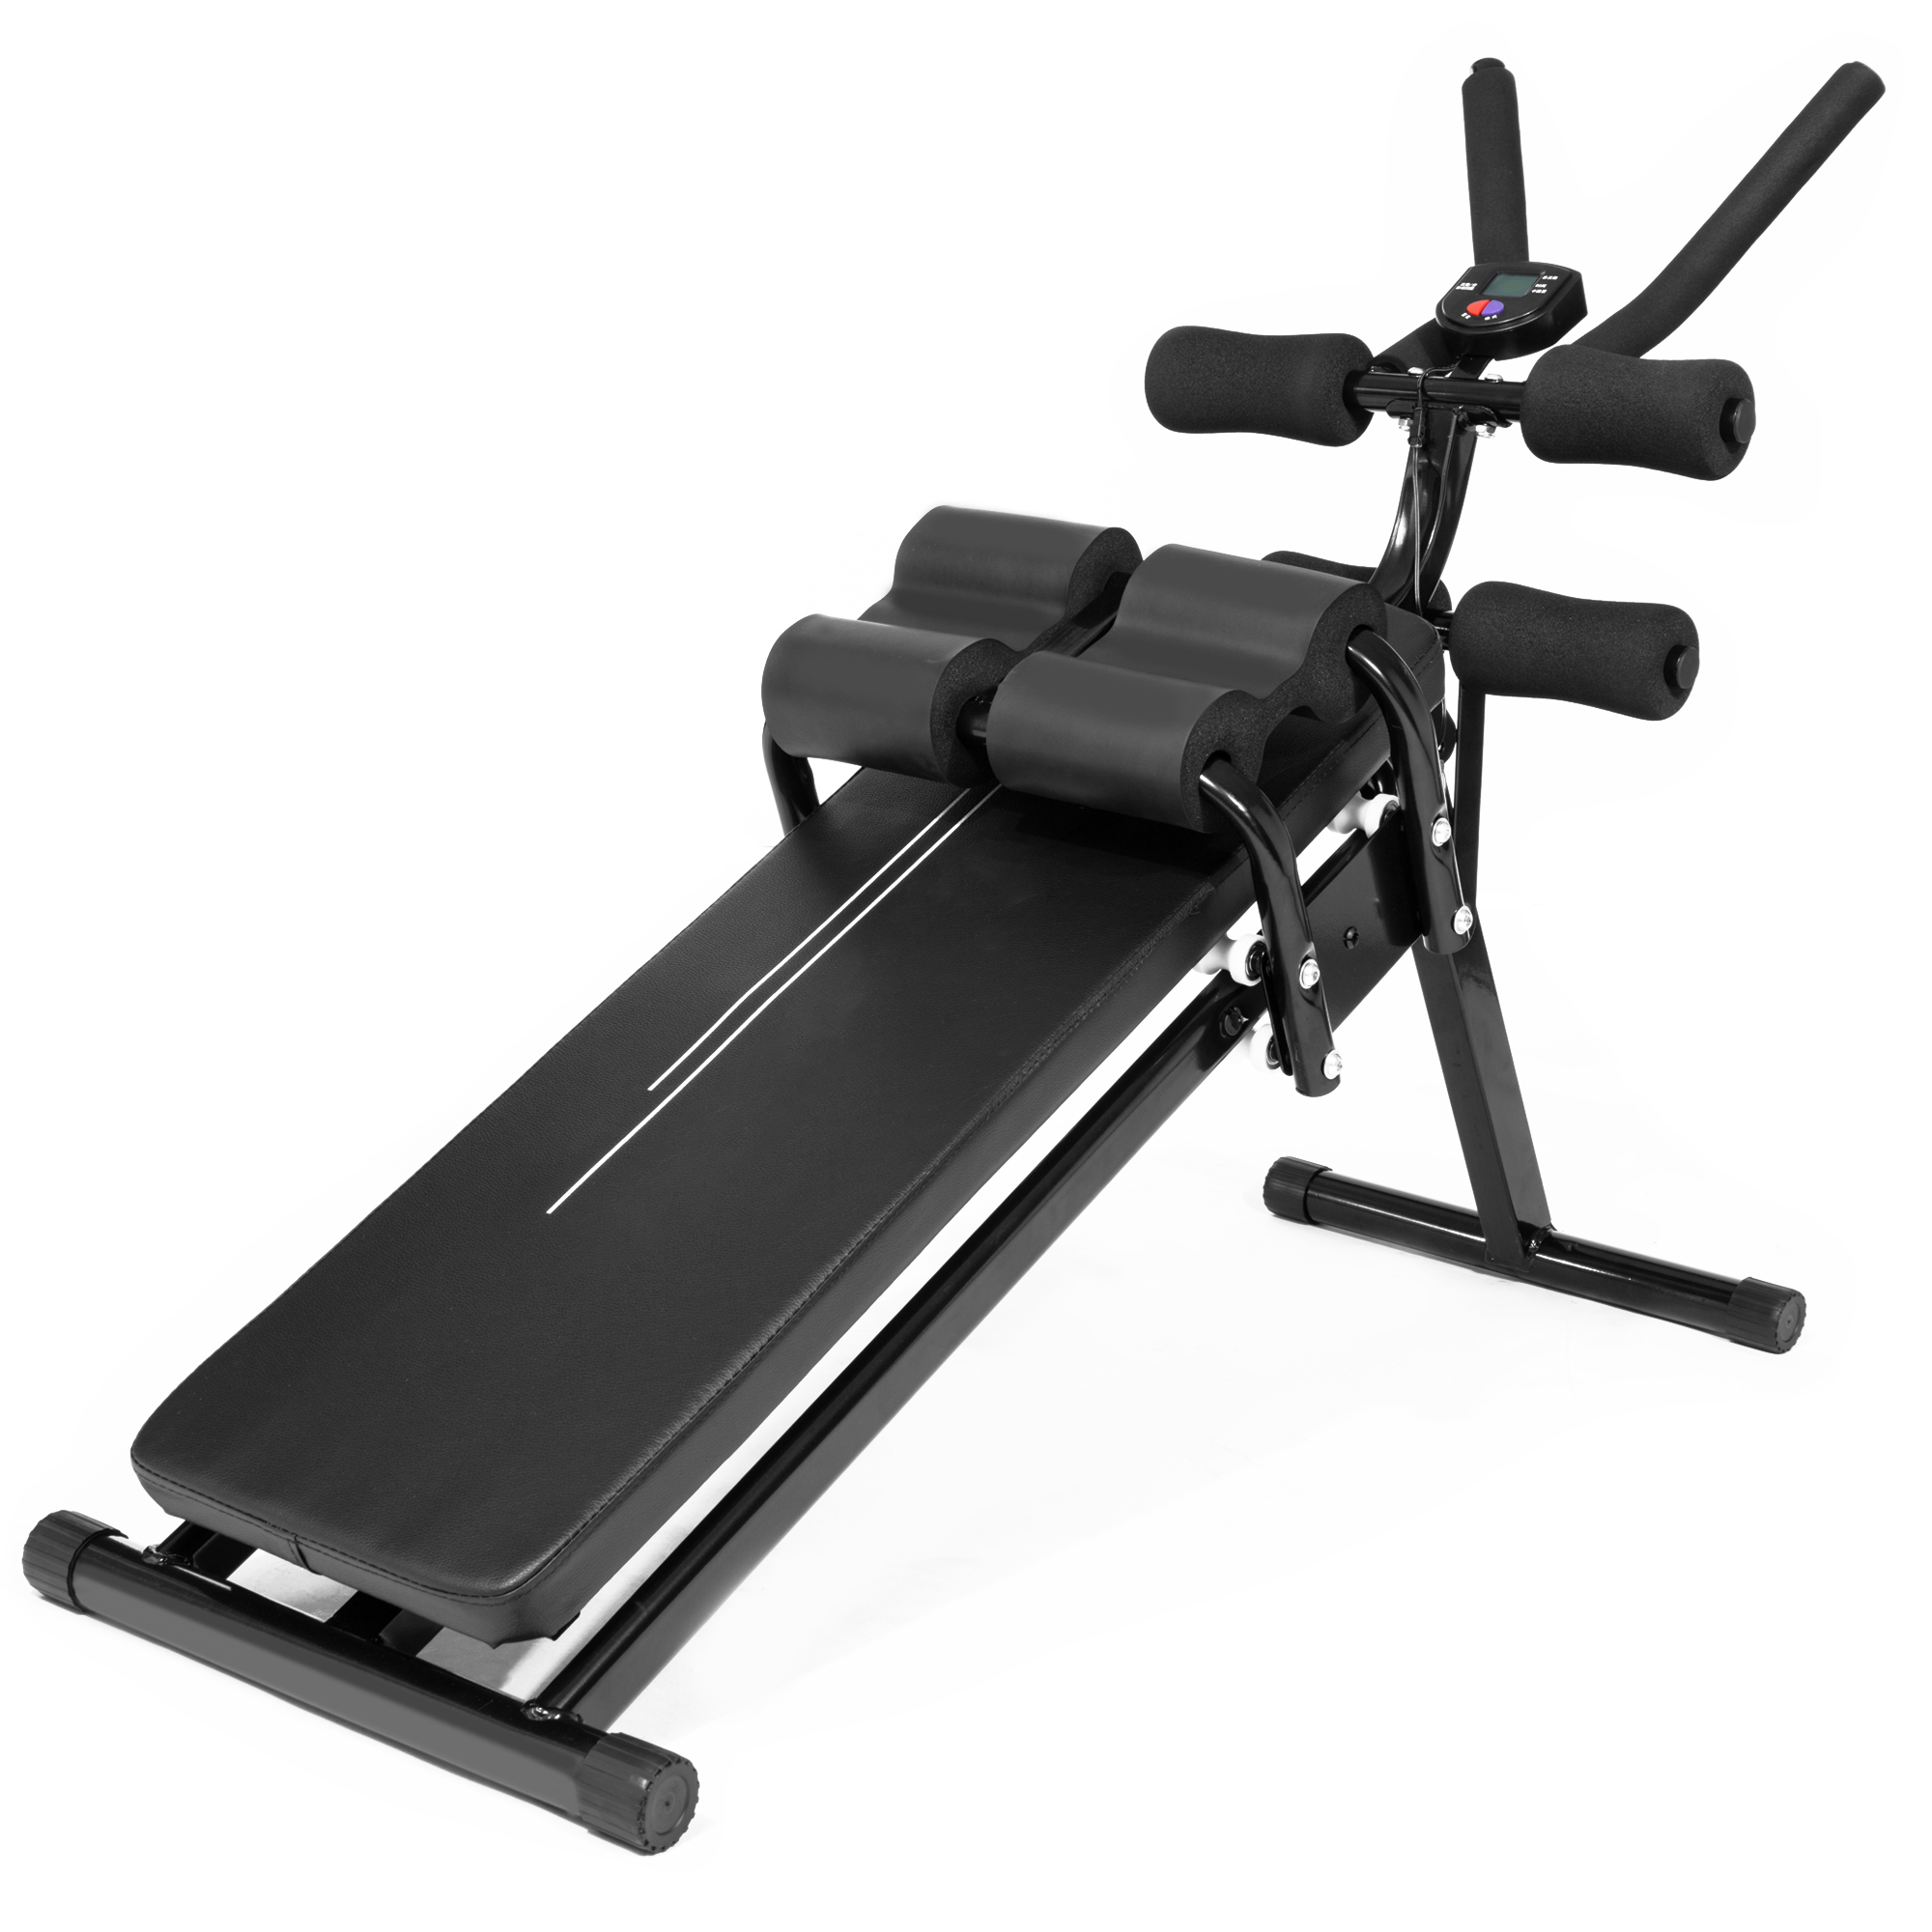 Abdominal Trainer Weight Bench Sit up Bench Ab Abdominal Crunch Ab Trainee Abdominal Exercise Equipment  Home Gym Lifting Training Leg Exercise Fitness Weight Bench for Abdominal Muscles Build - image 5 of 8